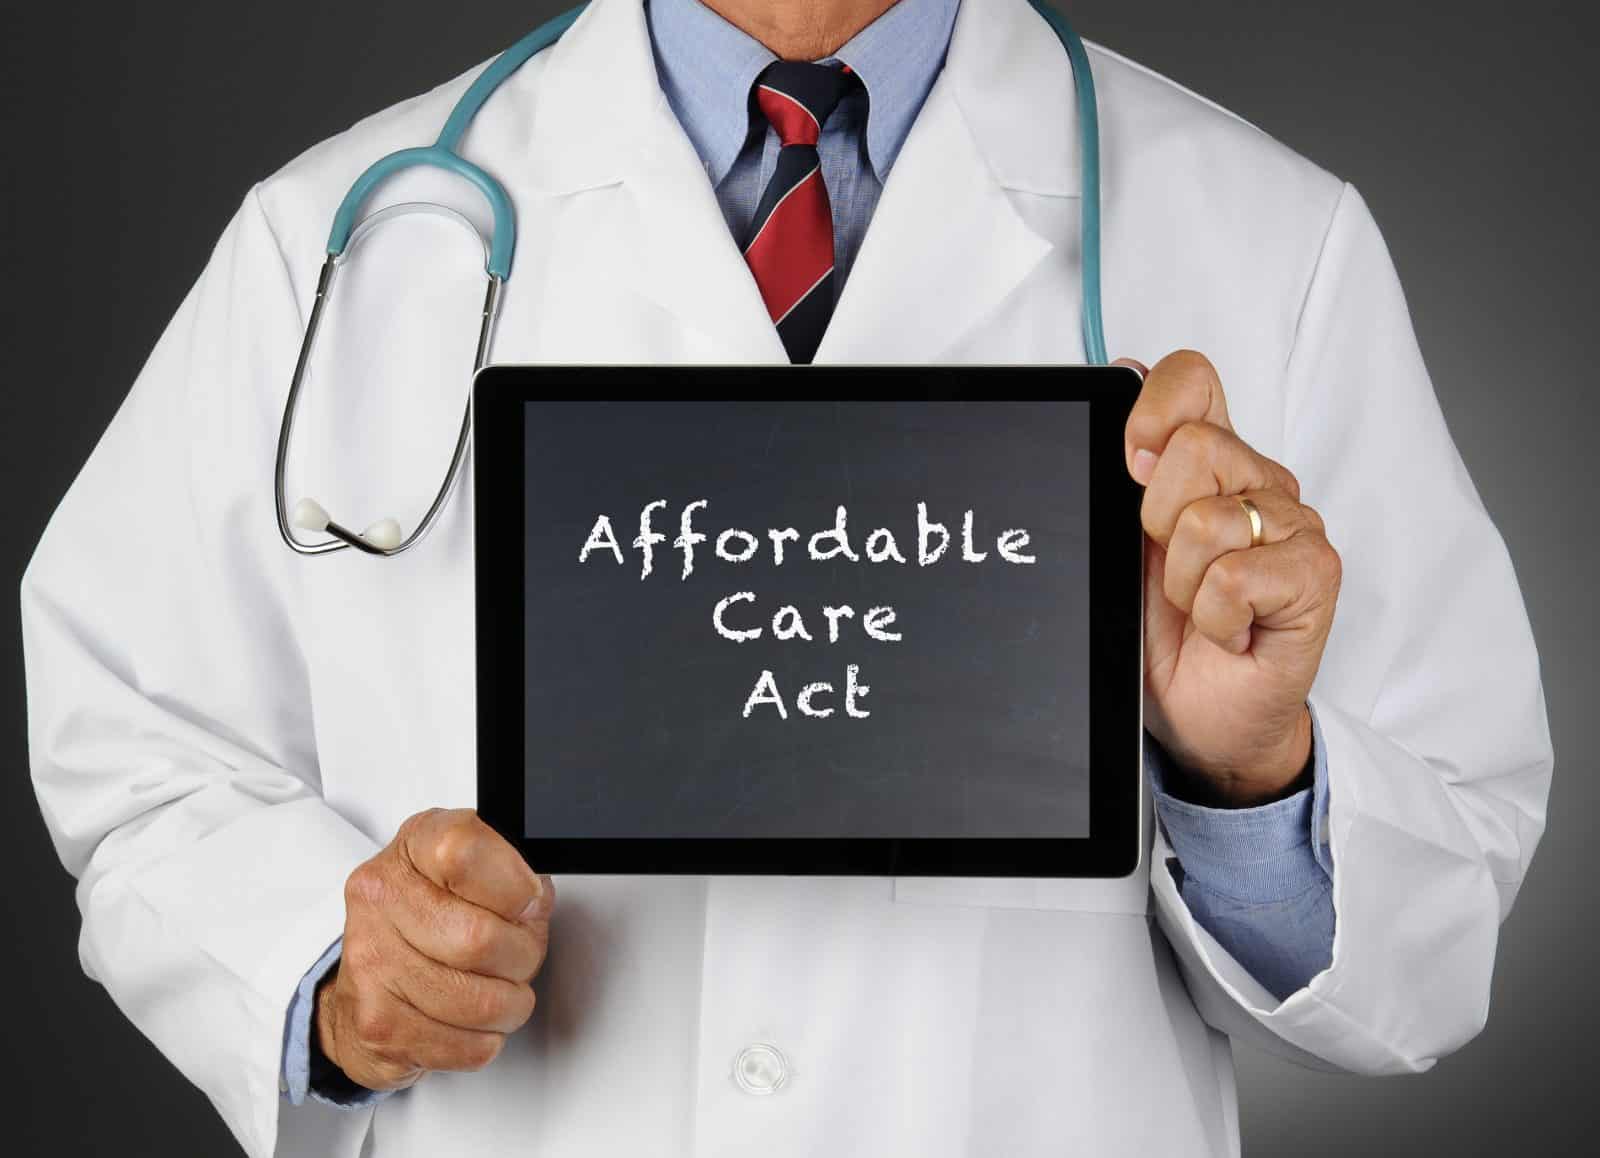 pros and cons of the affordable care act essay